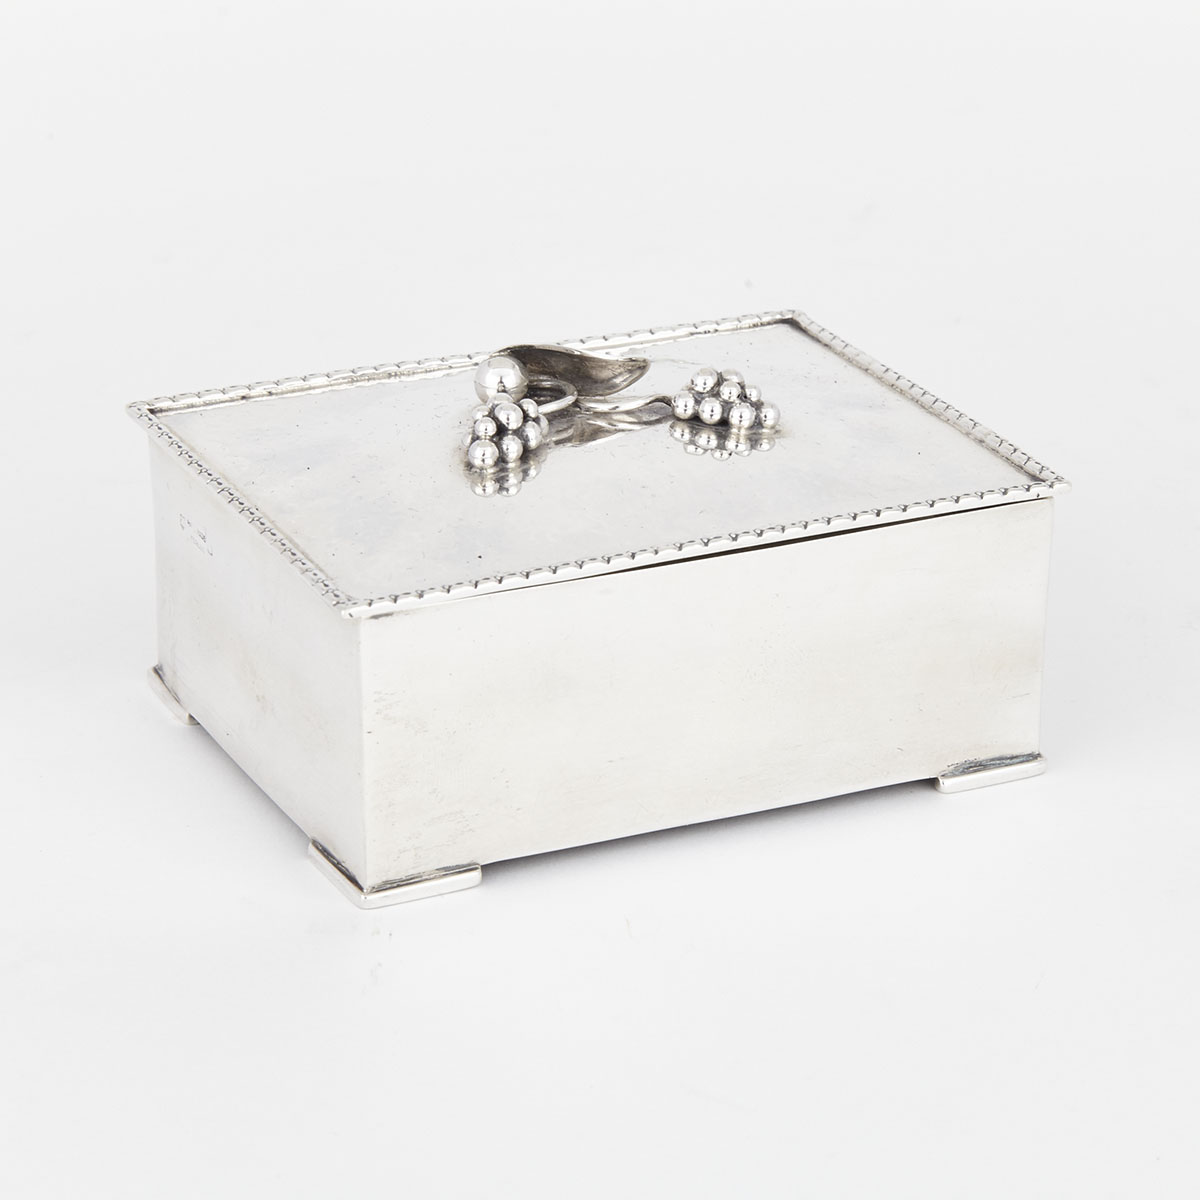 Canadian Silver Rectangular Cigarette Box, Carl Poul Petersen, Montreal, Que., mid-20th century